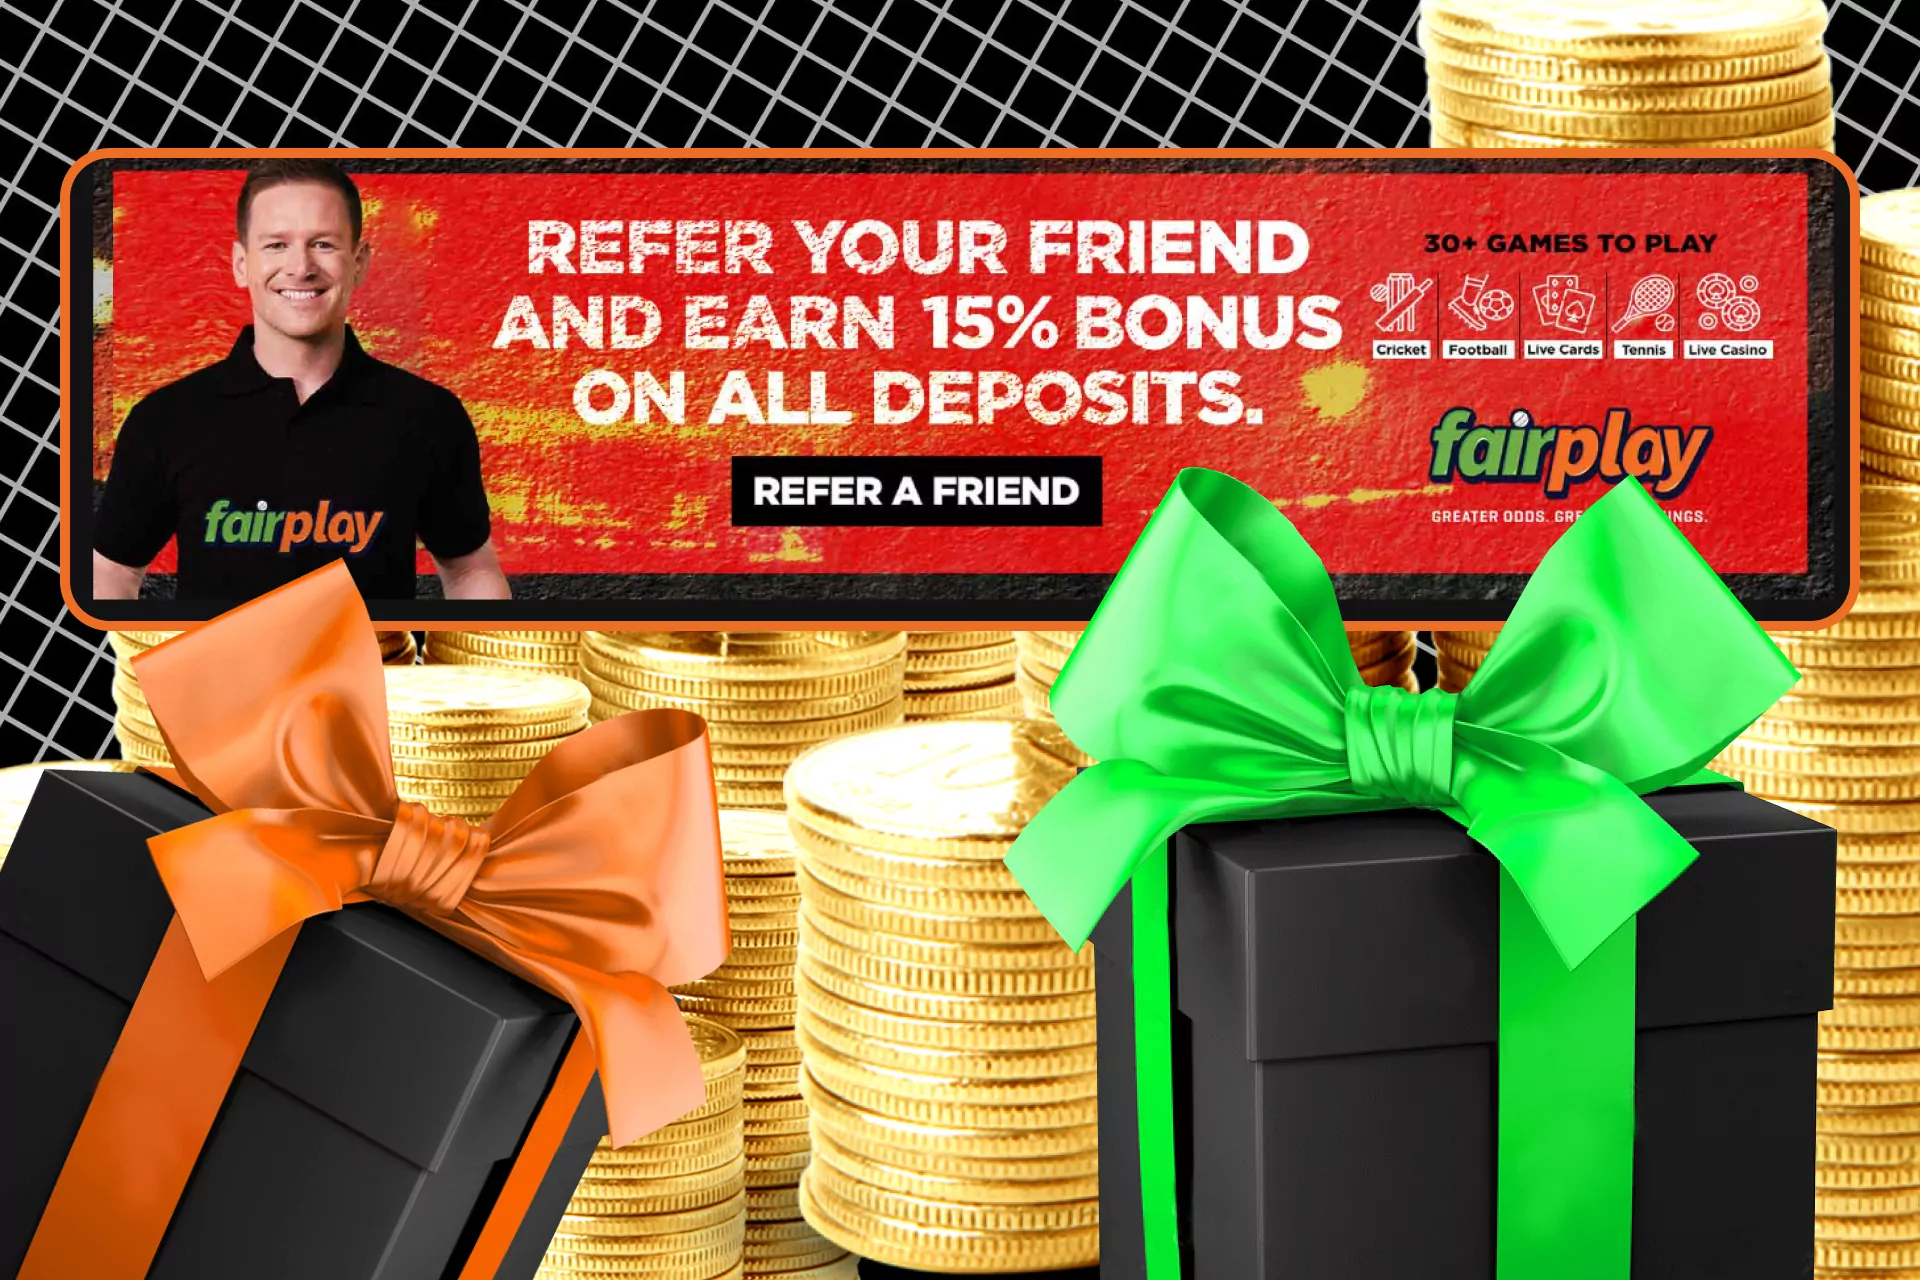 Get a bonus from Fairplay for inviting a friend.